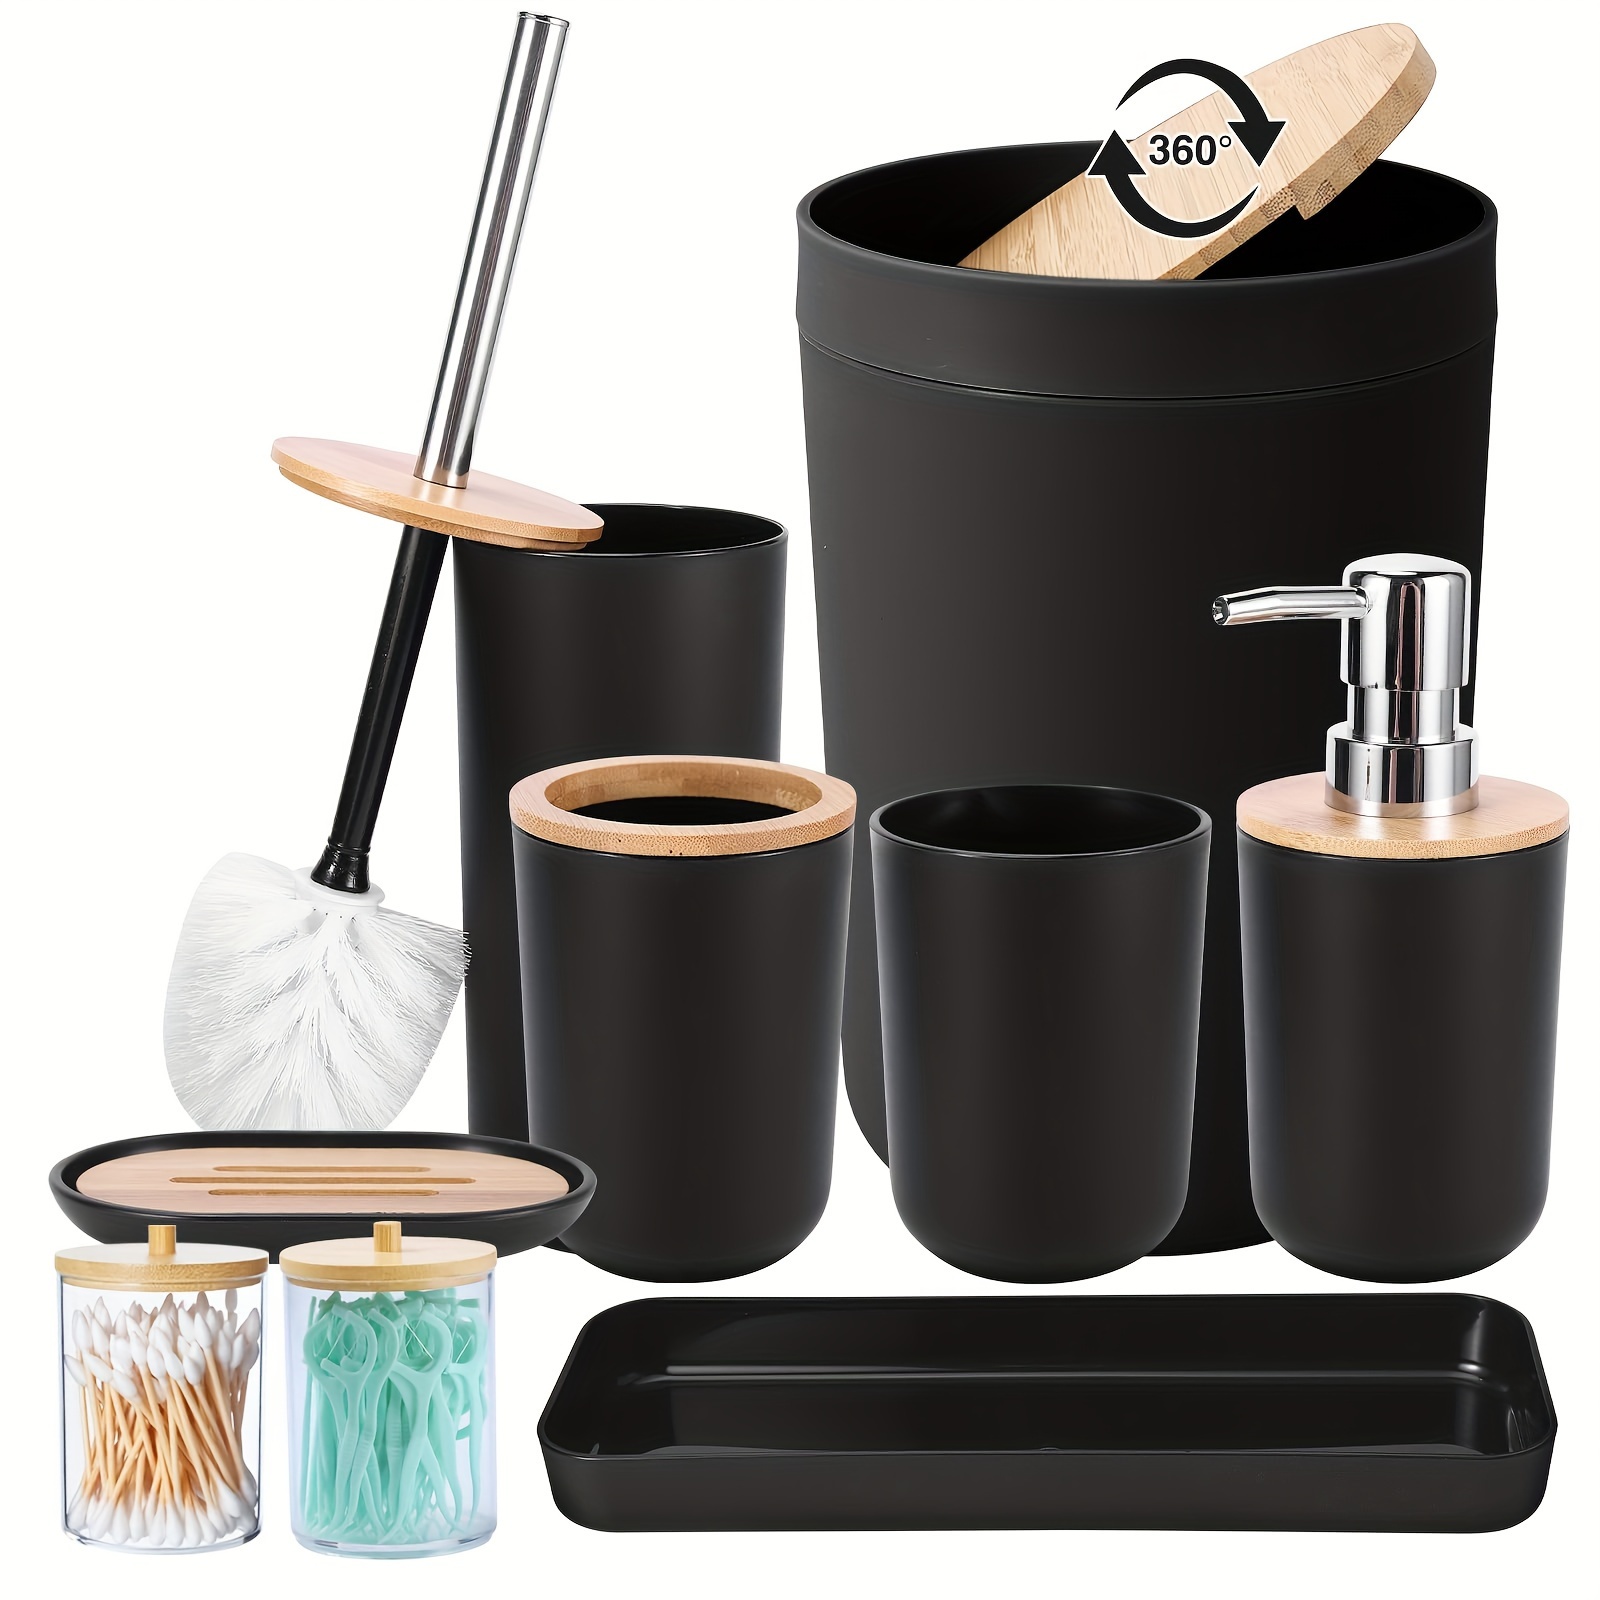 

9pcs Black Bamboo Cover Bathroom Accessories Set With Trash Can, Toothbrush Holder, Lotion Soap Dispenser, Soap Dish, Tumbler Cup